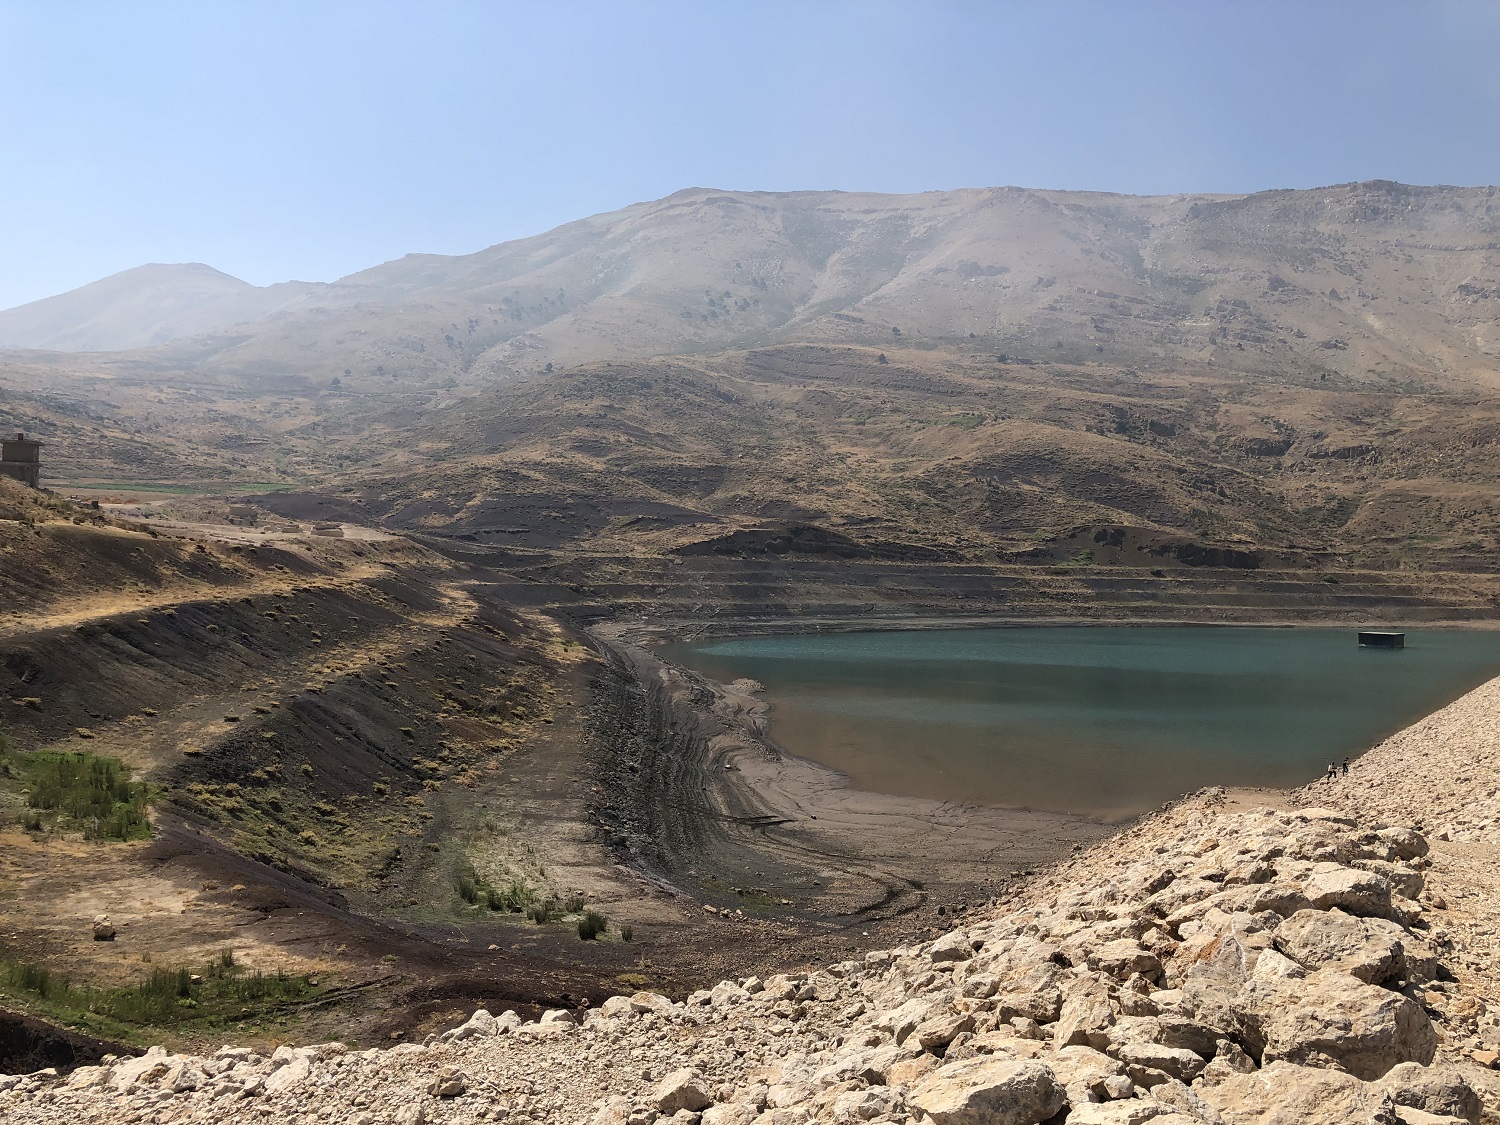 Lebanon Dam Business: Destroying the Environment and Squandering Public Funds